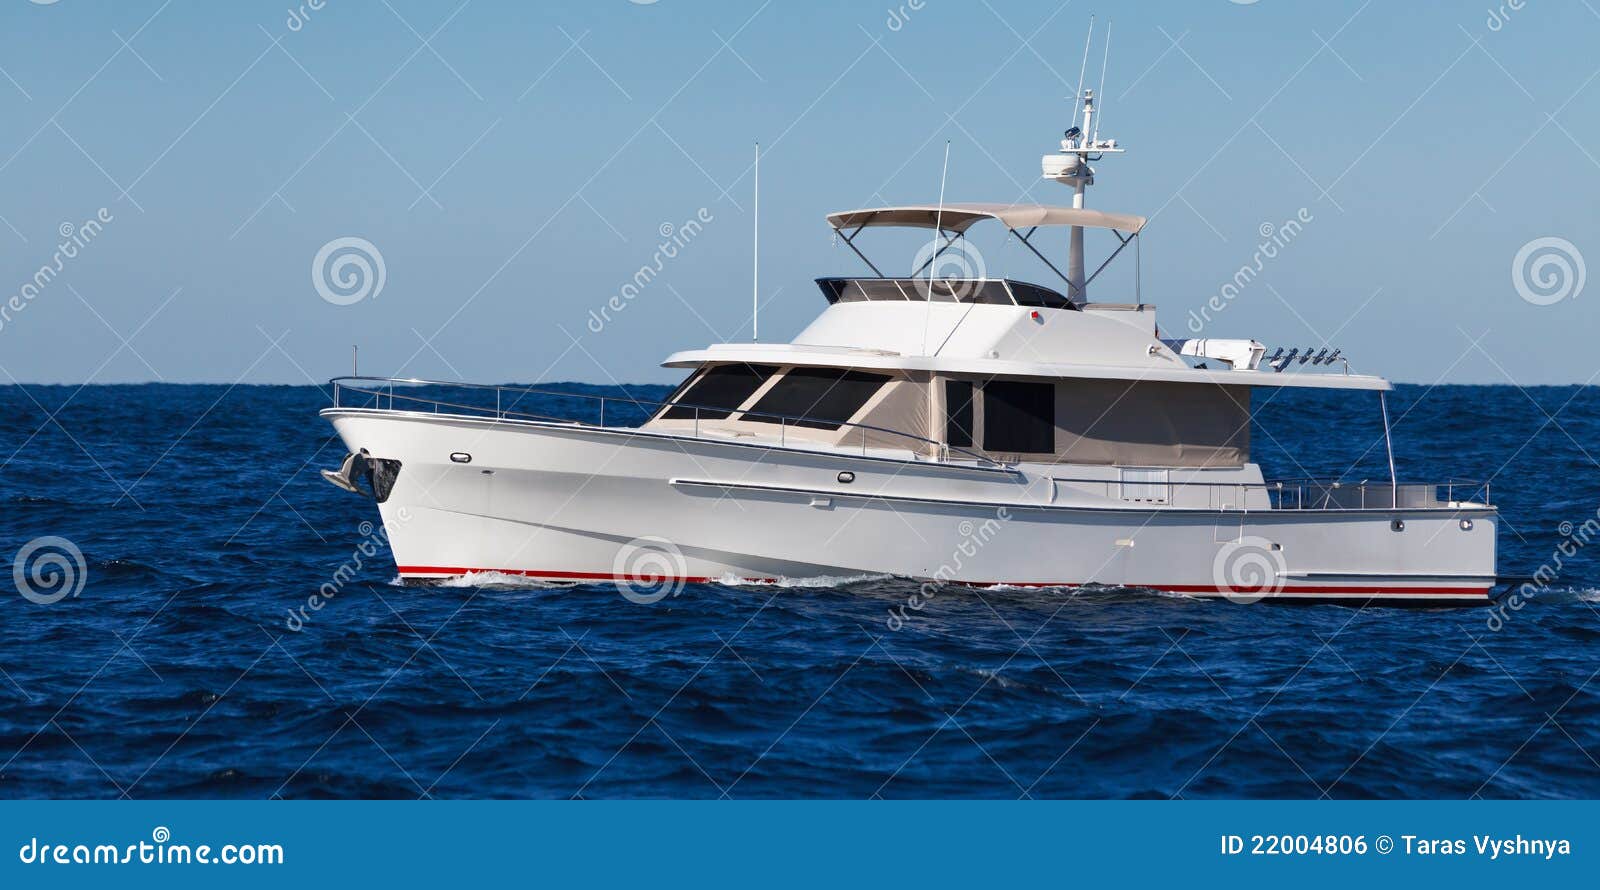 Boat Small Ocean Royalty Free Stock Image - Image: 22004806